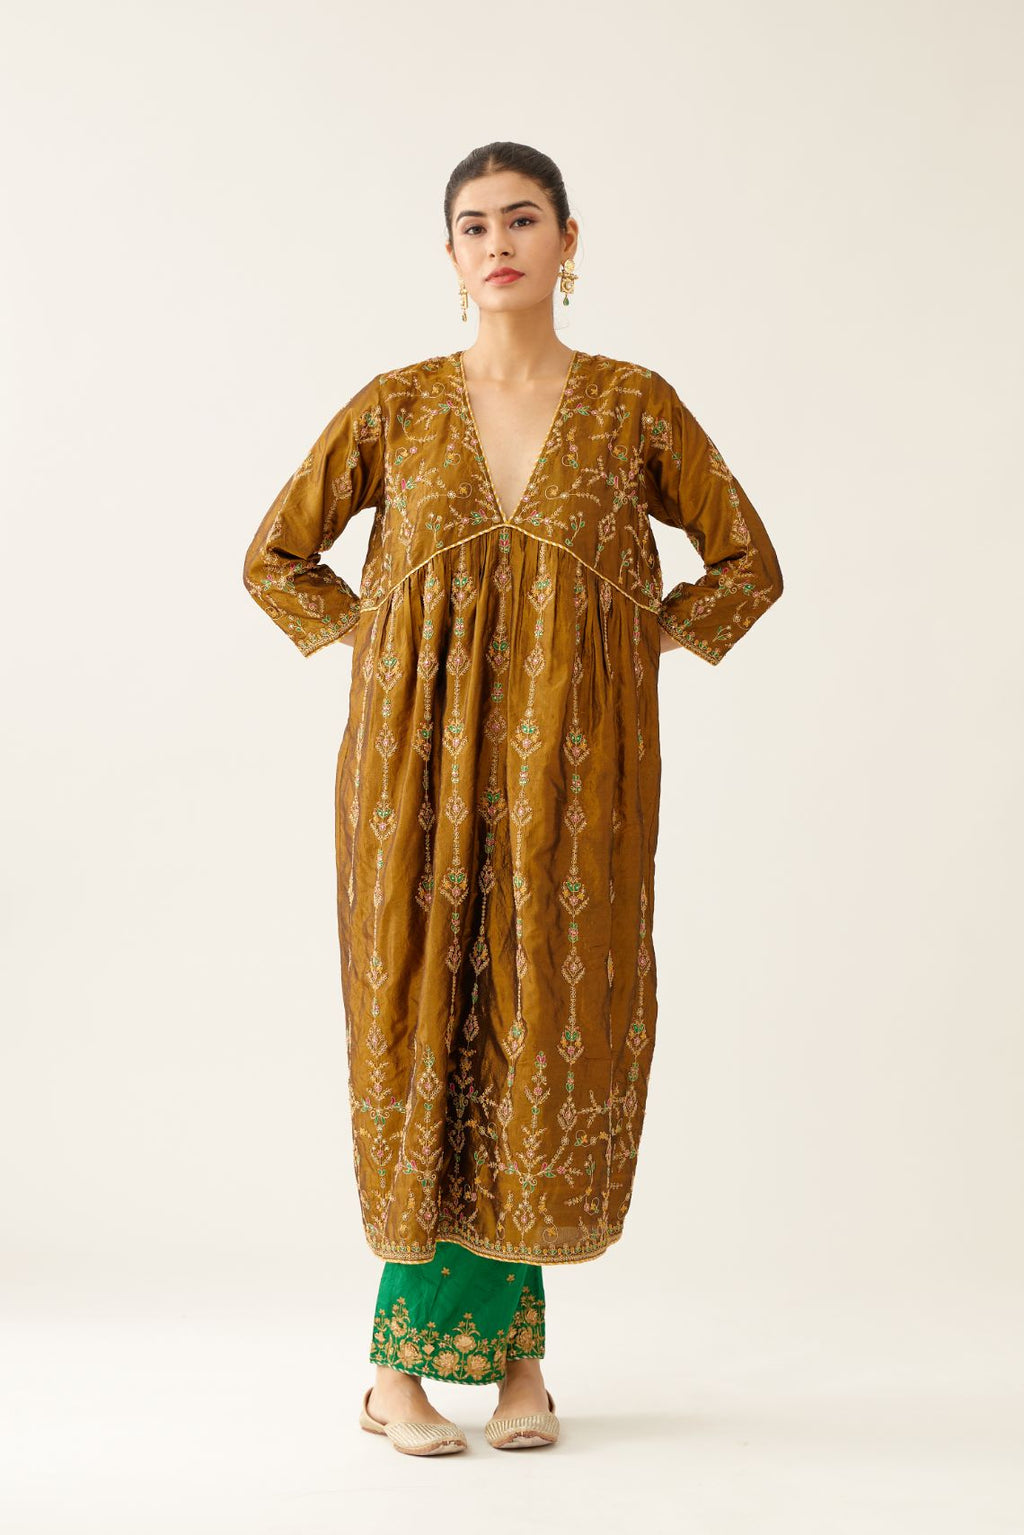 Golden olive silk embroidered kurta dress set with fine gathers at empire line.